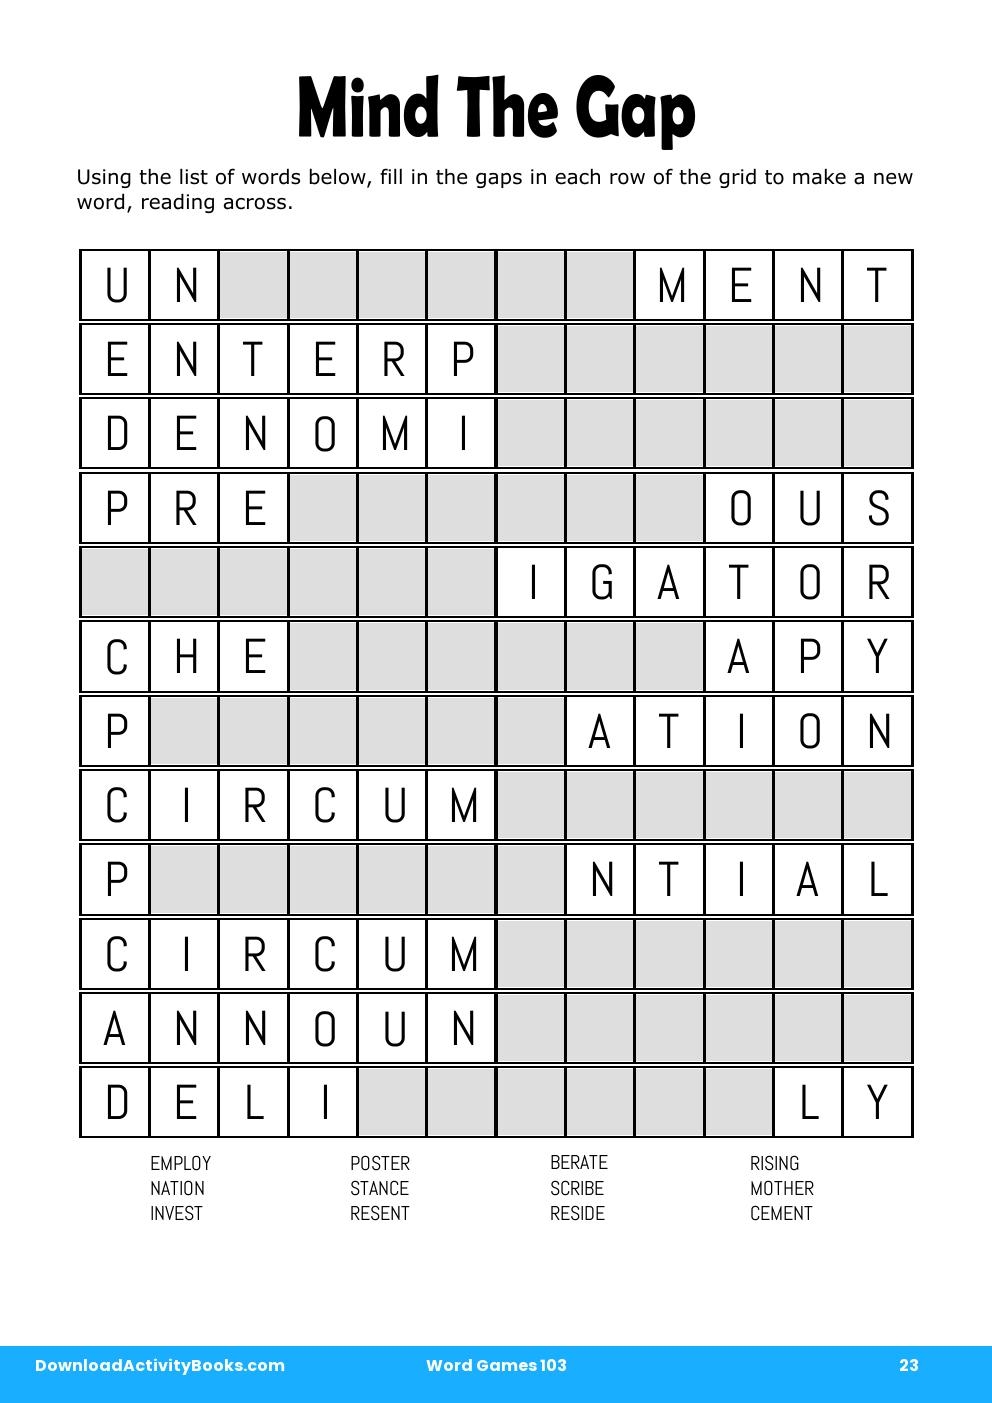 Mind The Gap in Word Games 103